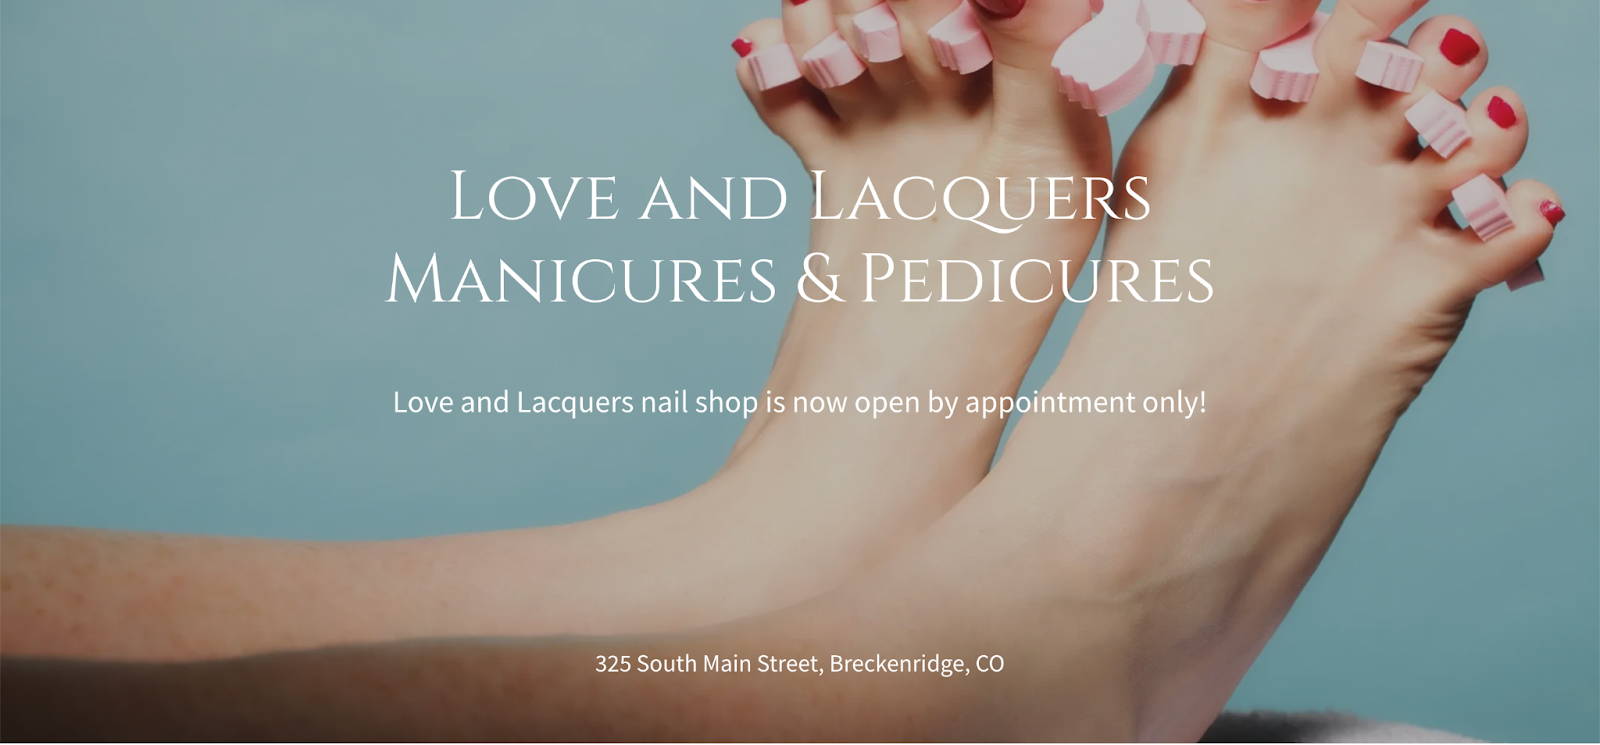 Best nail salon websites, example from Love and Lacquers.